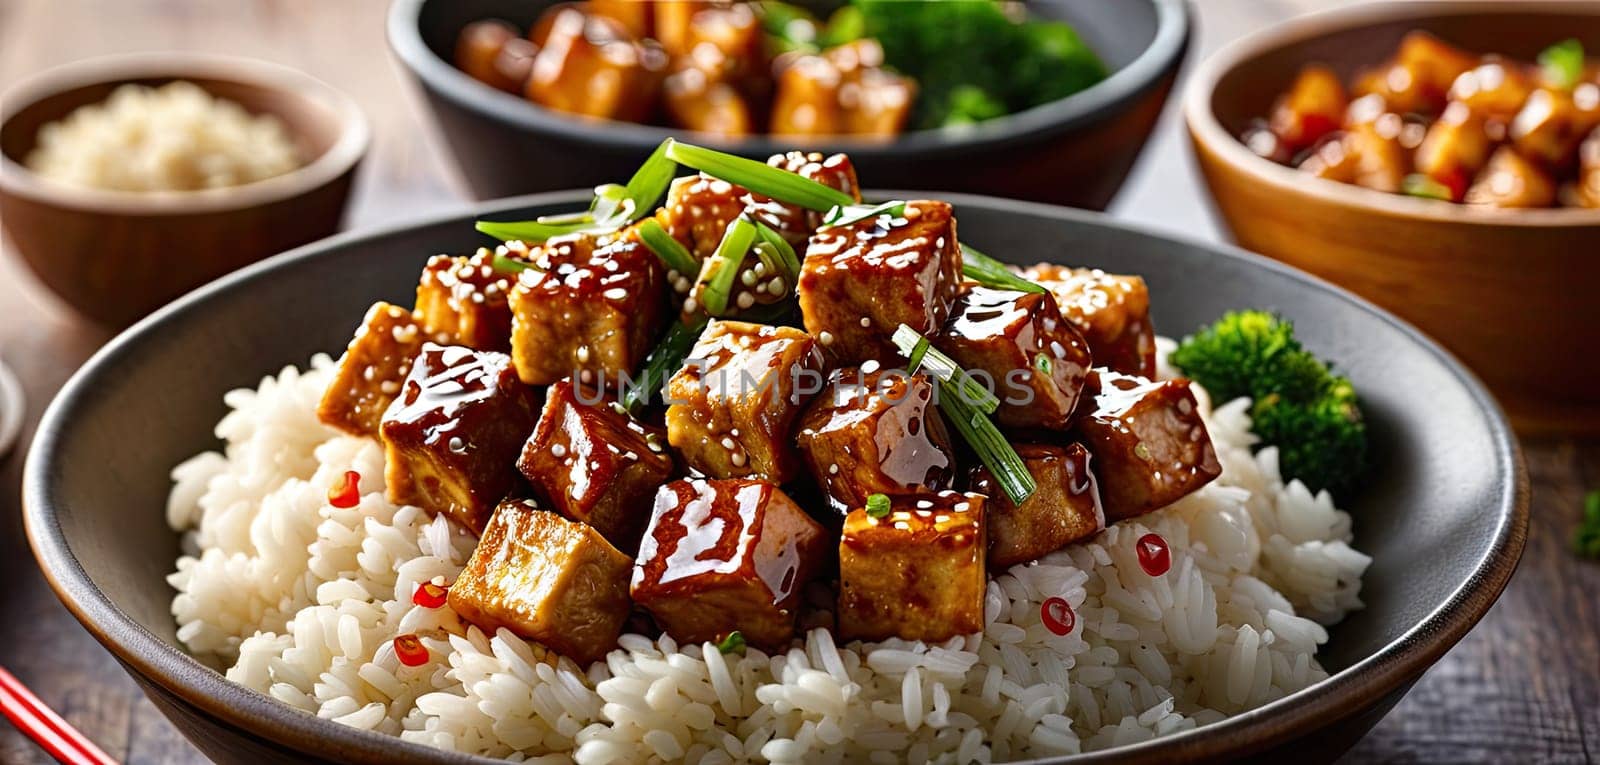 Rice, tofu, dinner. Tso s sesame tofu, rice, dinner. Glazed tofu cubes on rice, garnished with sesame seeds, green onions in bowl on wooden table